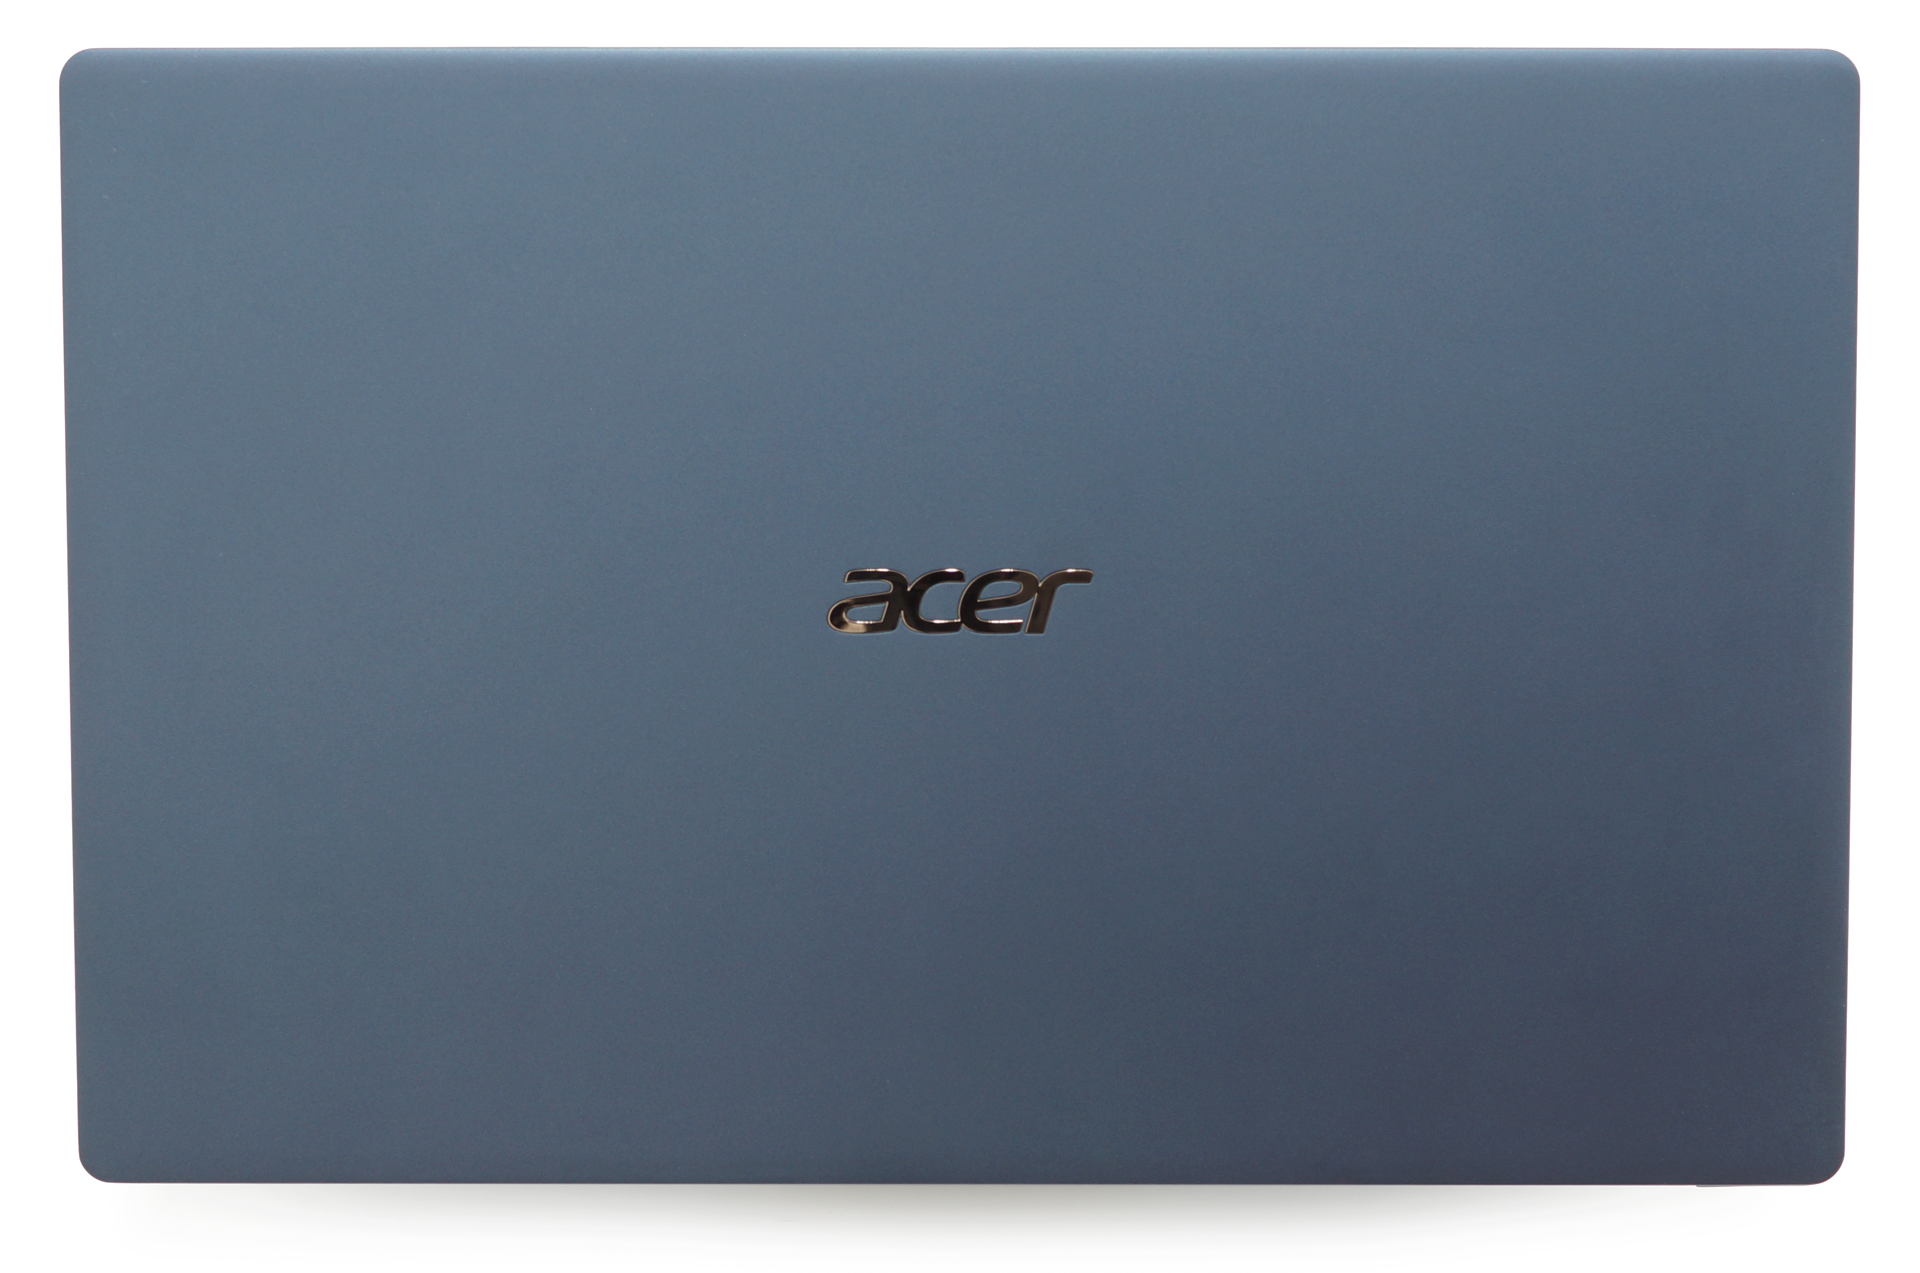 Acer Swift 5 (SF515-51T) review - the world's lightest 15-inch